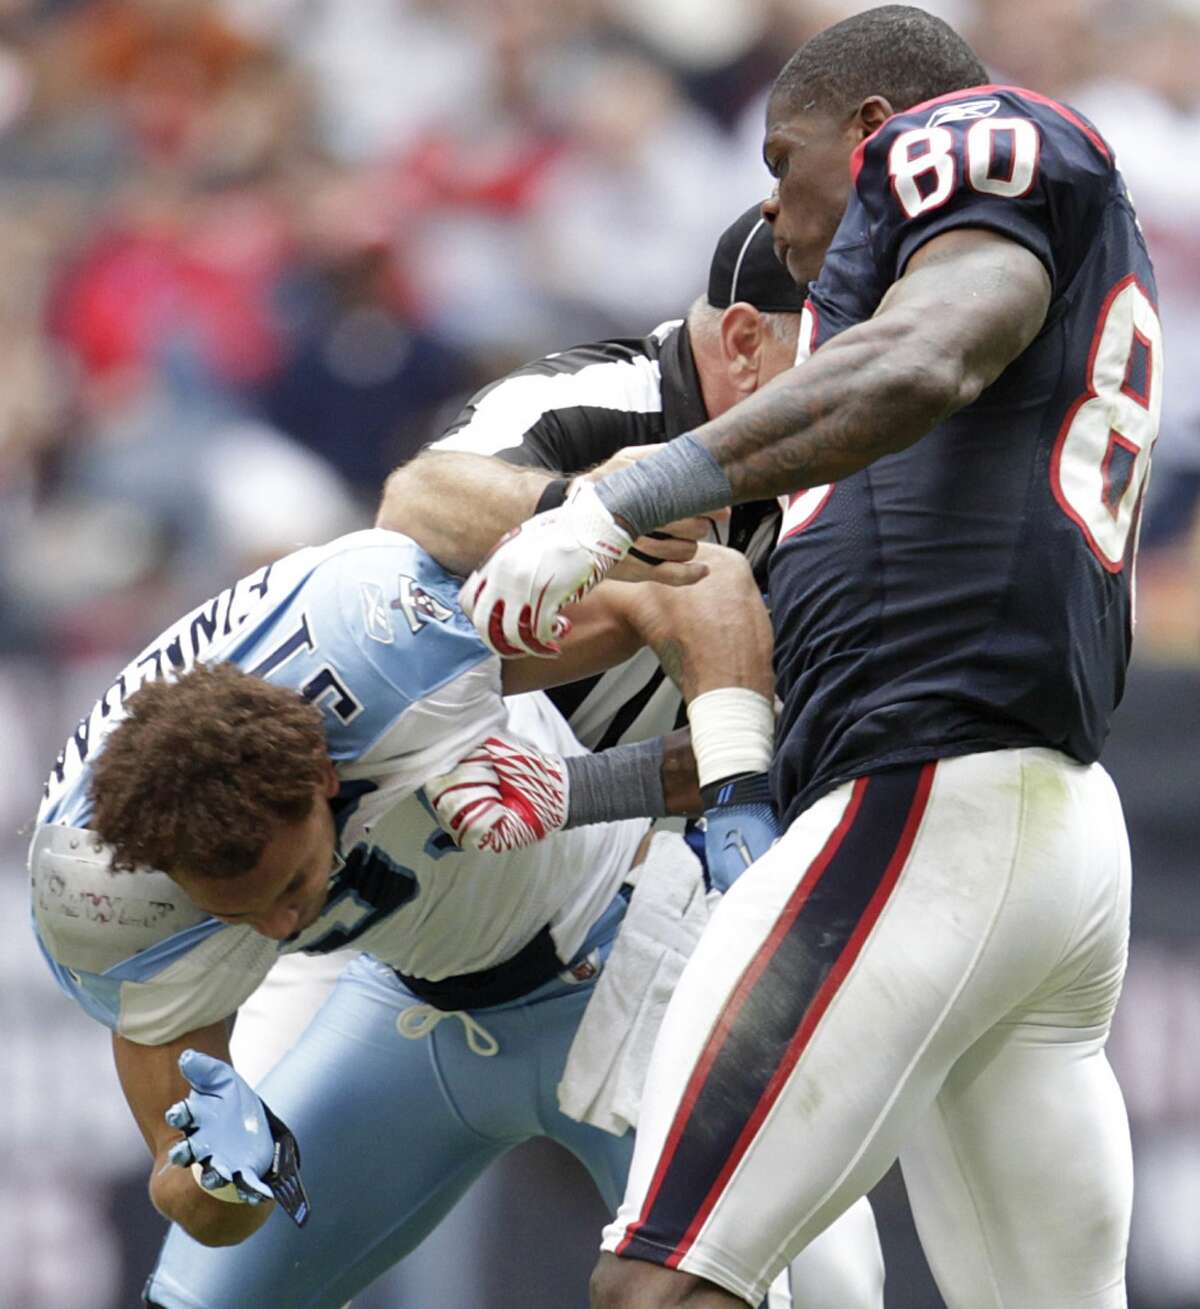 Andre Johnson vs. Cortland Finnegan The quiet, dignified former Texans receiver finally had enough of Finnegan's antics during a November 2010 game at NRG Stadium and laid the smackdown on the Titans quarterback. When Finnegan retired in the spring, he took a shot at Johnson, but it, like his showing in their fight, was pretty weak.